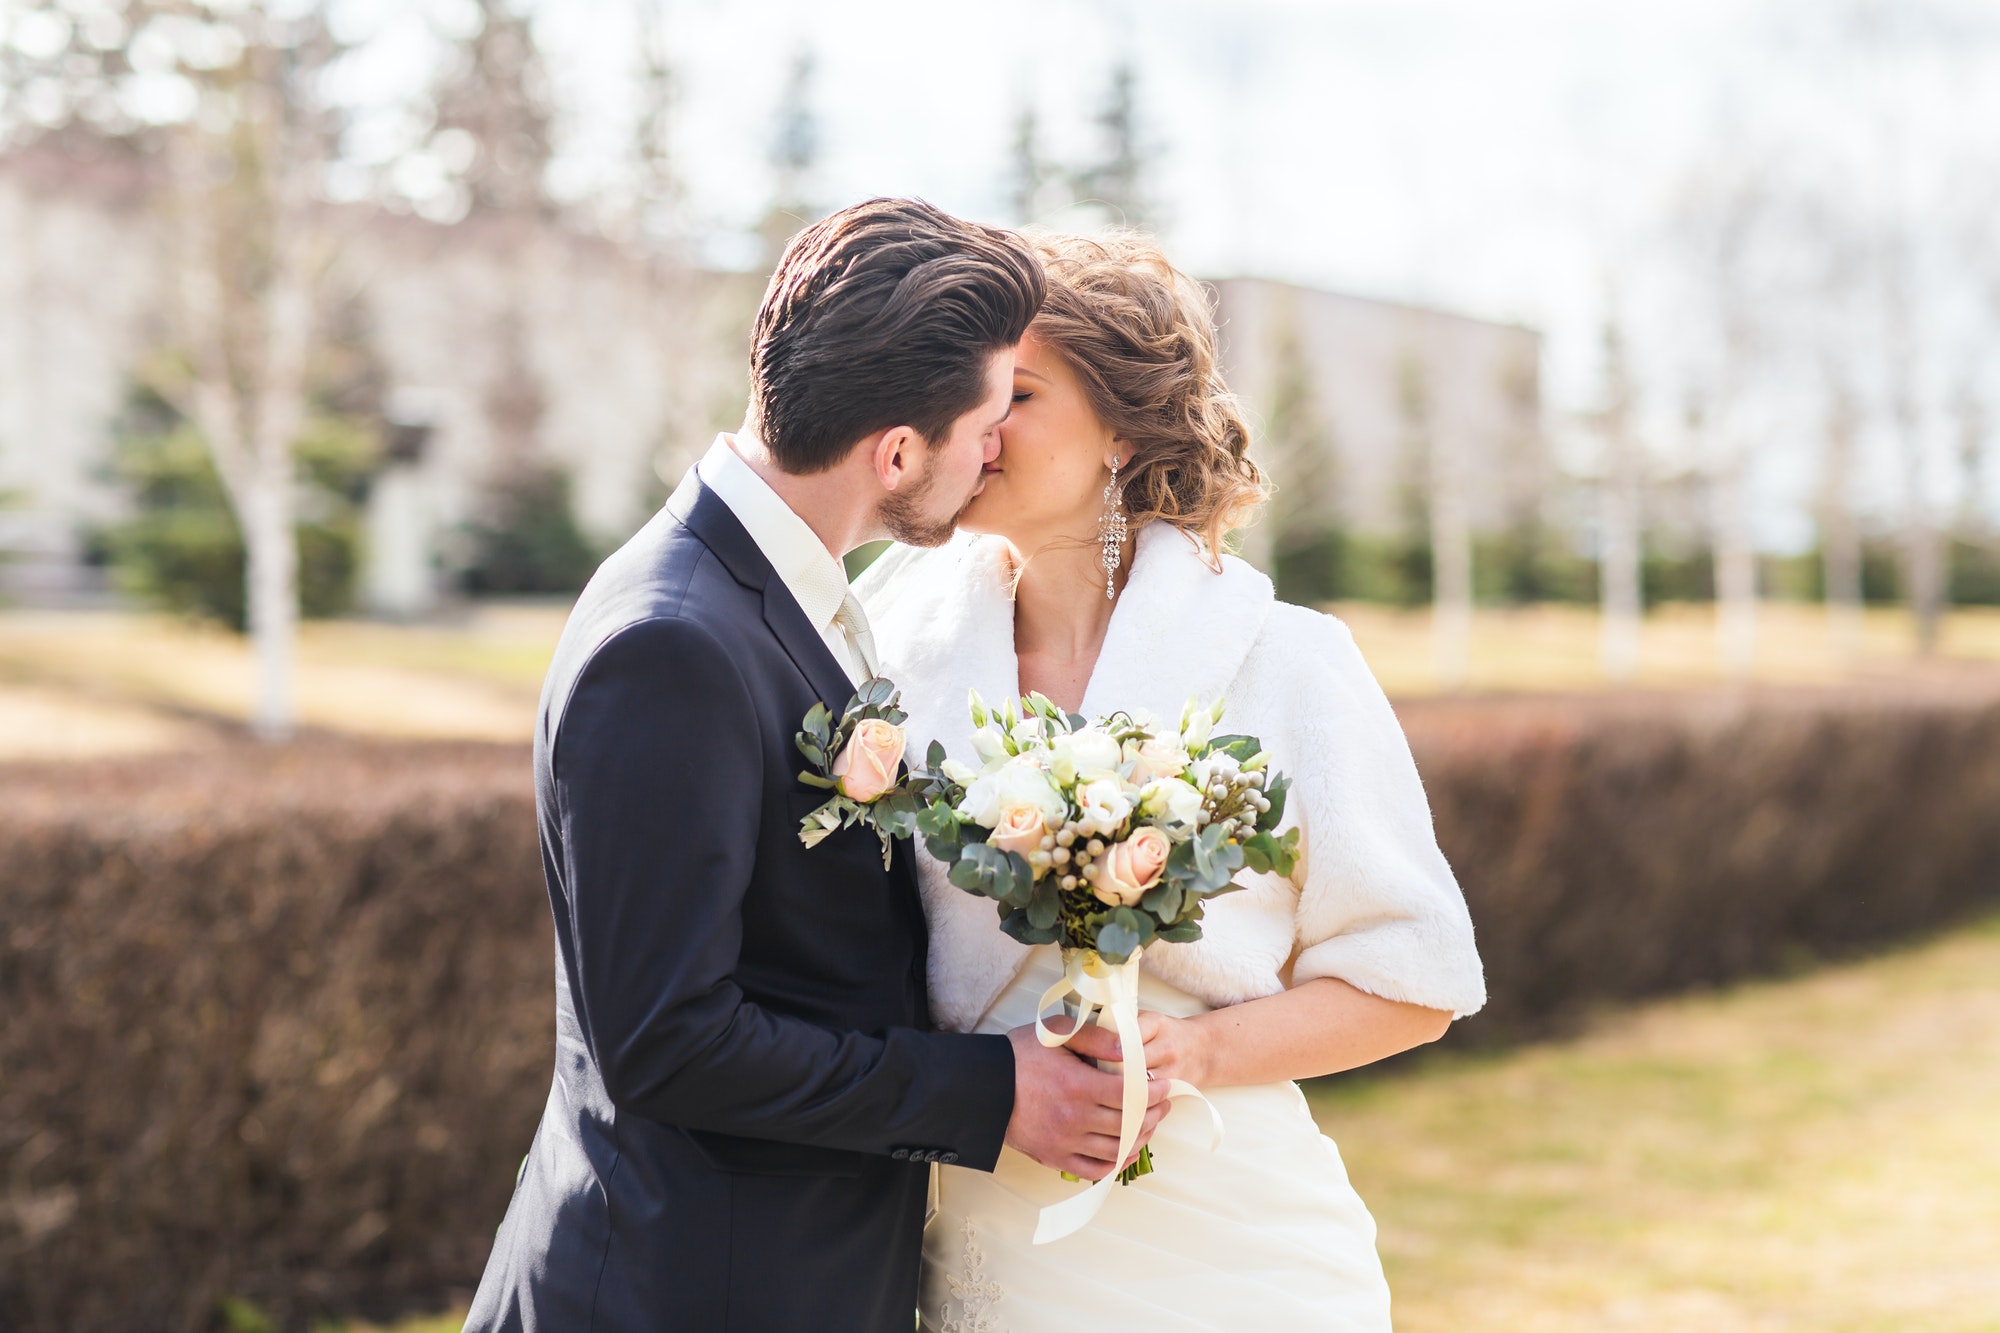 bride-and-groom-kissing-on-their-wedding-day-outdoors.jpg